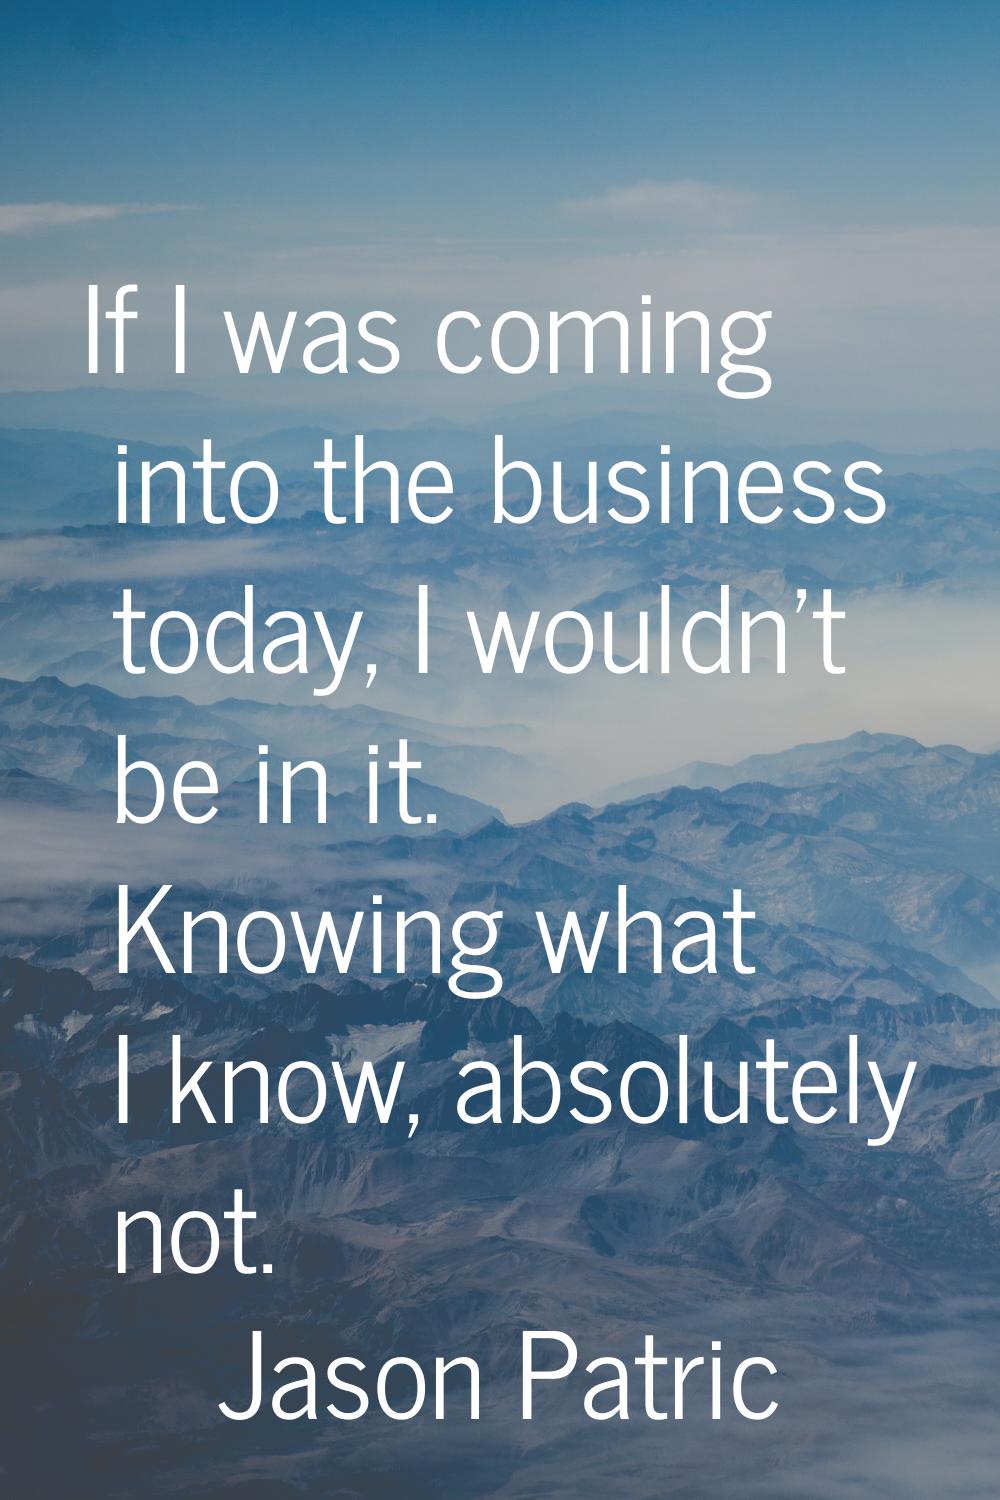 If I was coming into the business today, I wouldn't be in it. Knowing what I know, absolutely not.